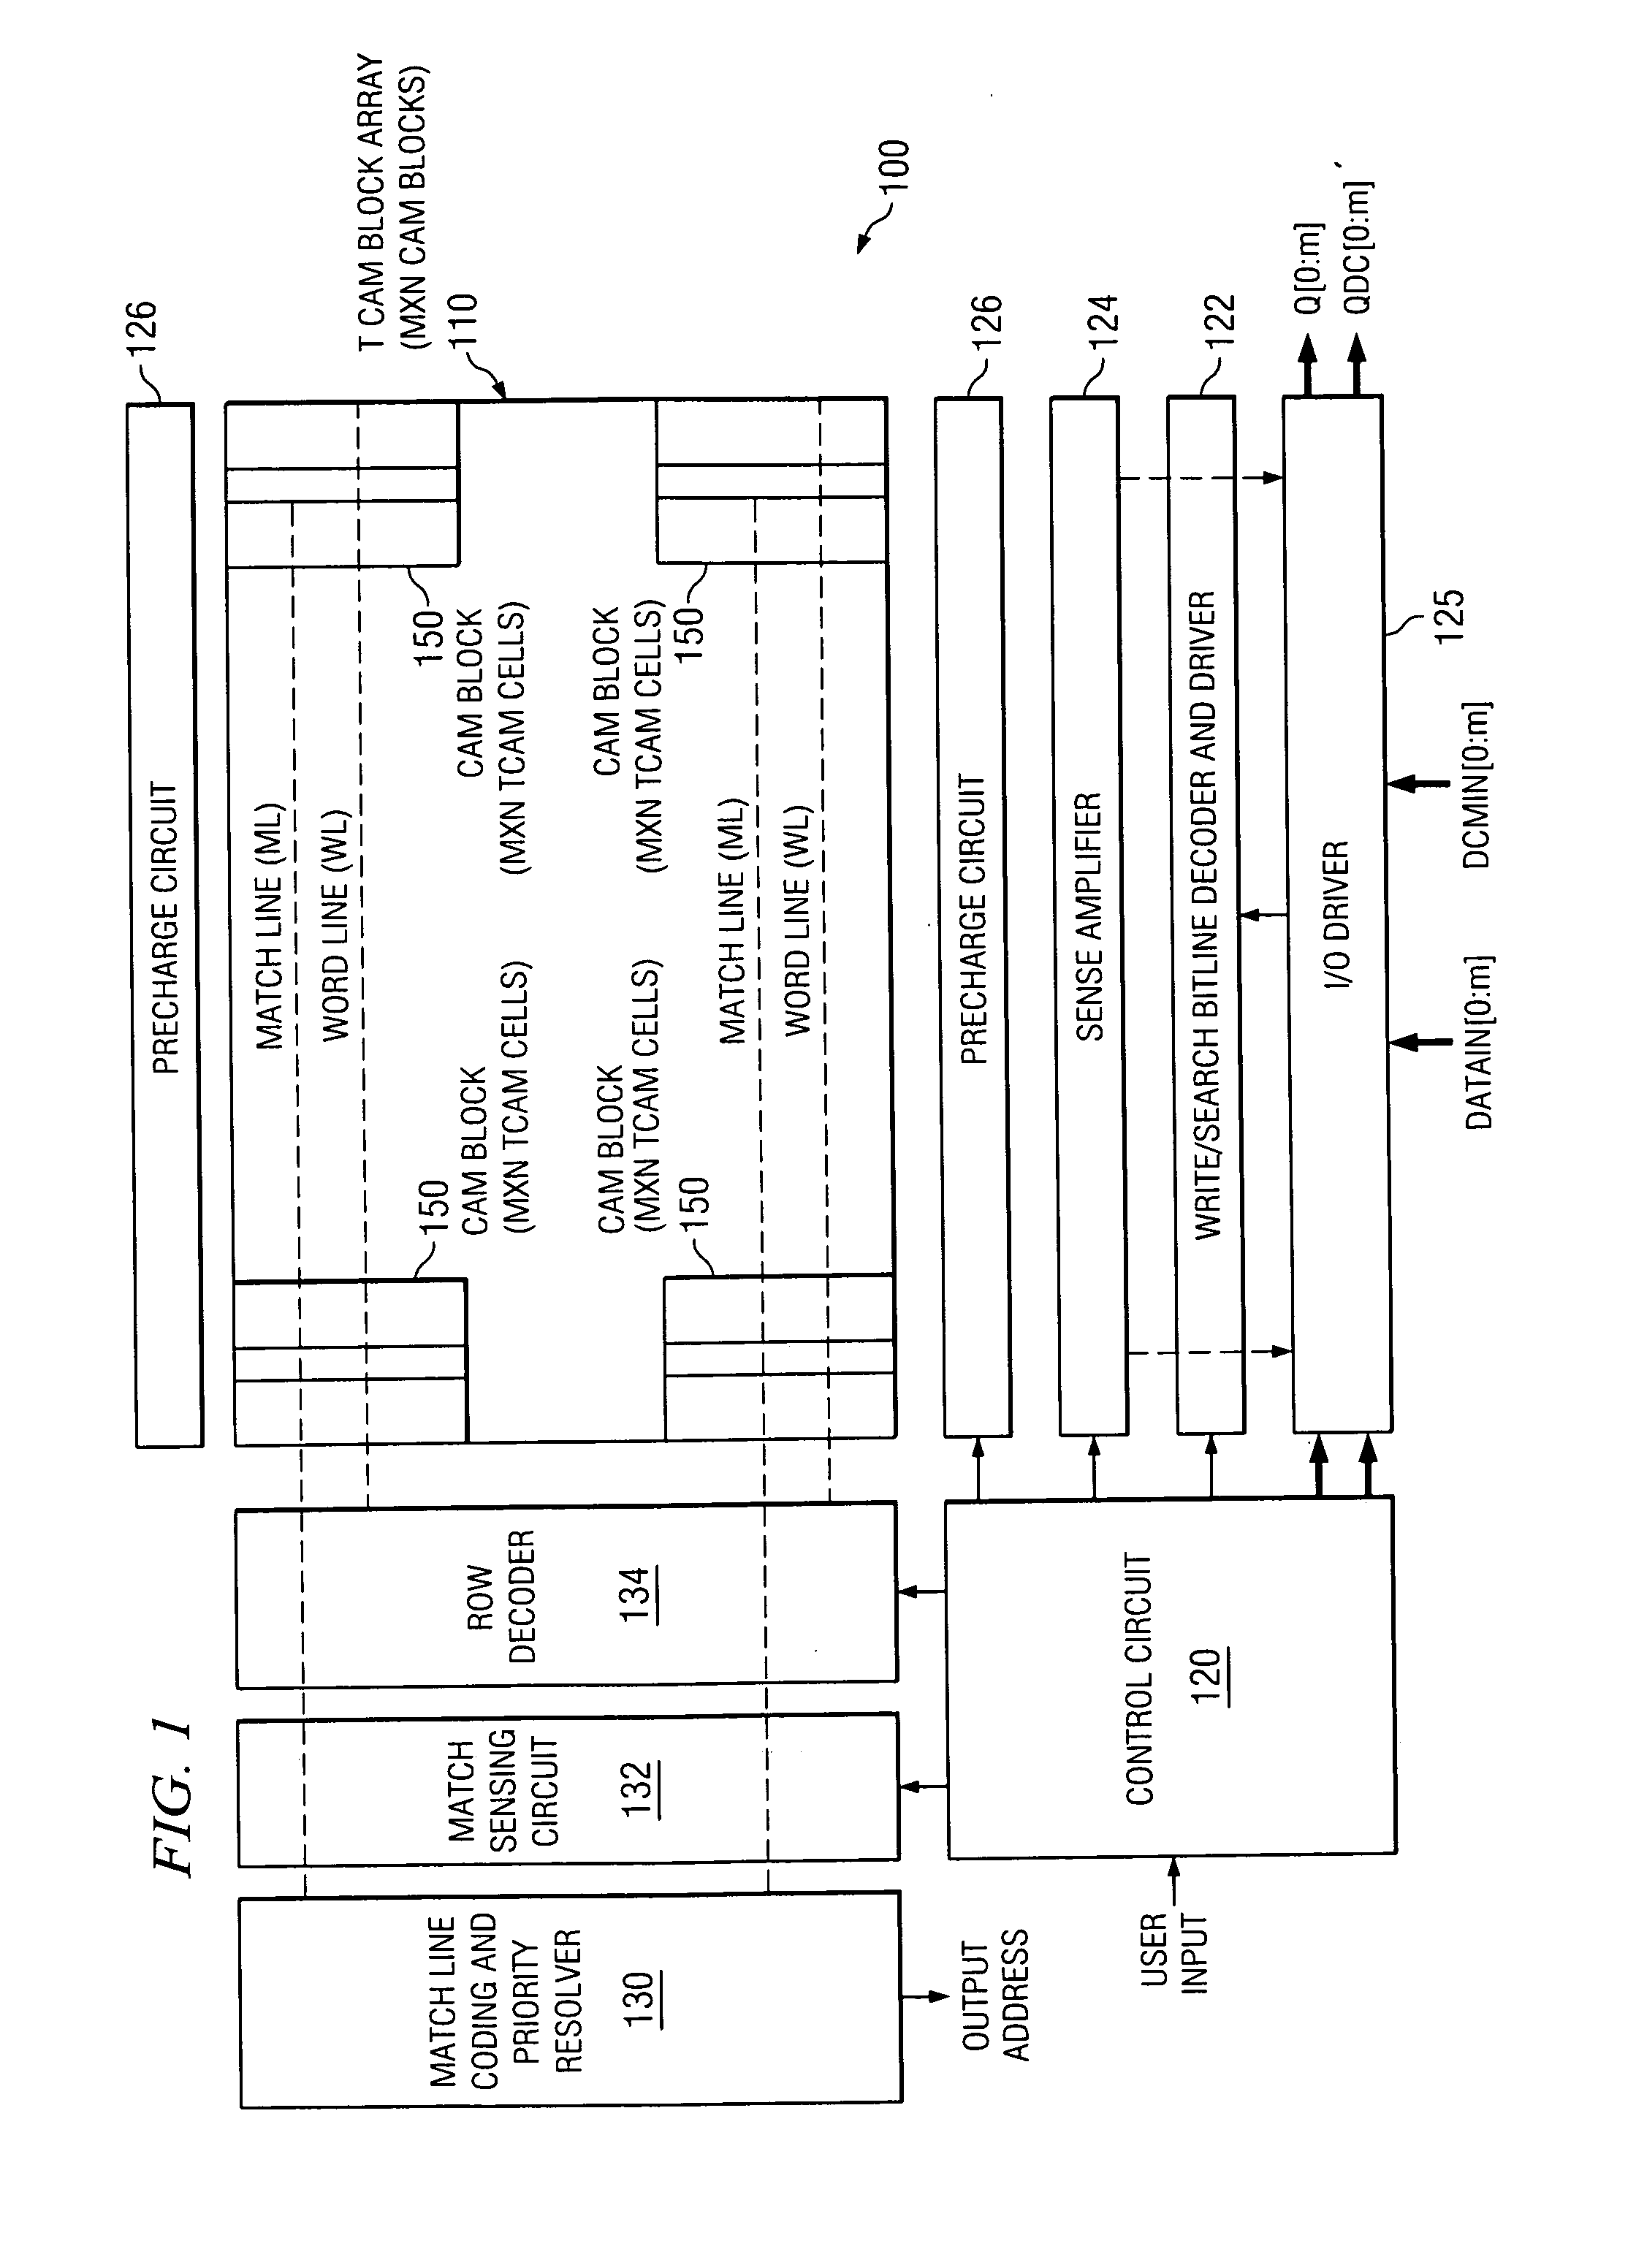 Area efficient stacked TCAM cell for fully parallel search